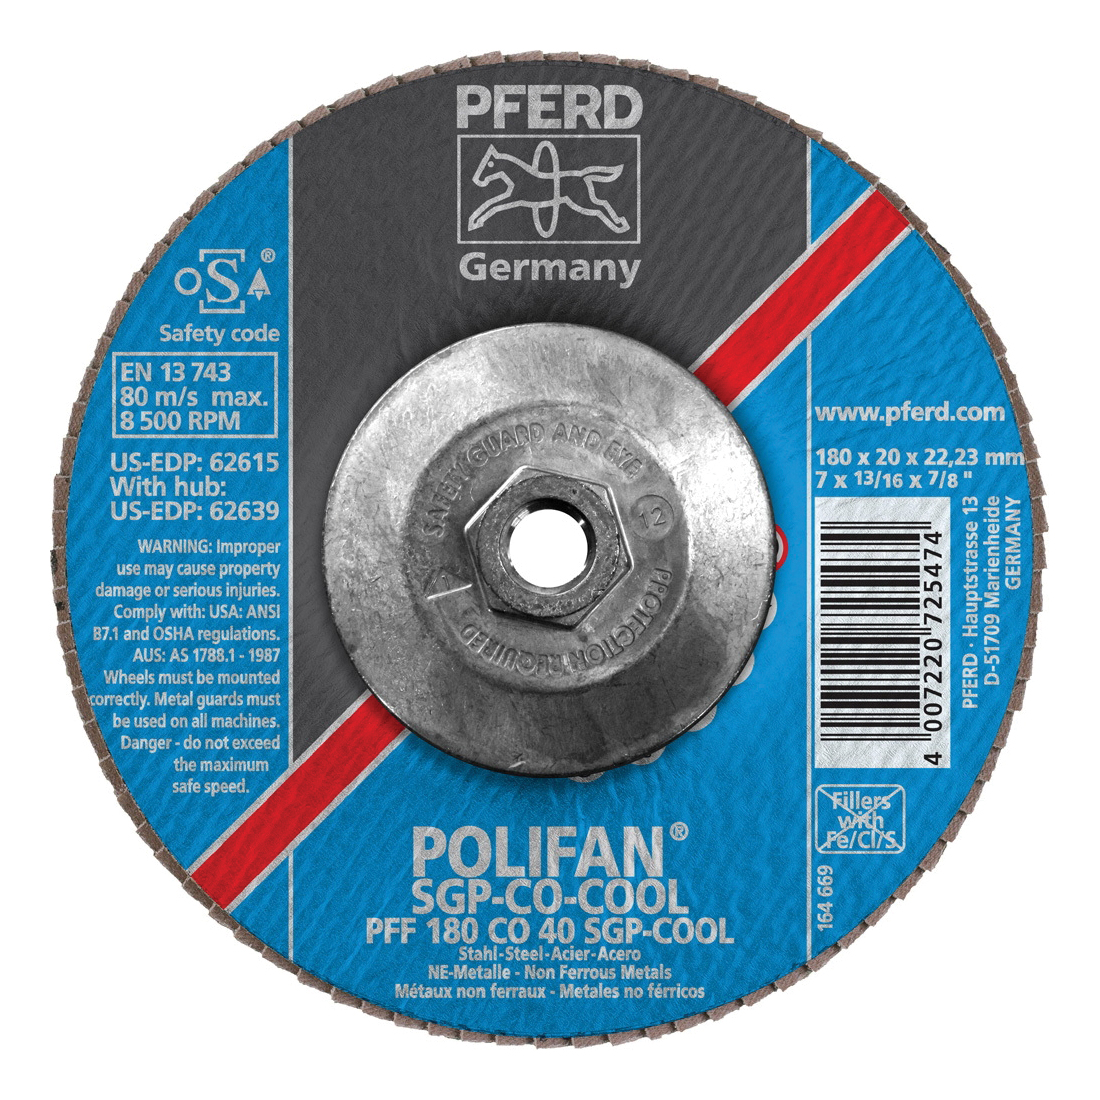 PFERD Polifan® 62639 Special Line SGP CO-COOL Threaded Coated Abrasive Flap Disc, 7 in Dia, 40 Grit, Ceramic Oxide Abrasive, Type 27 Flat Disc